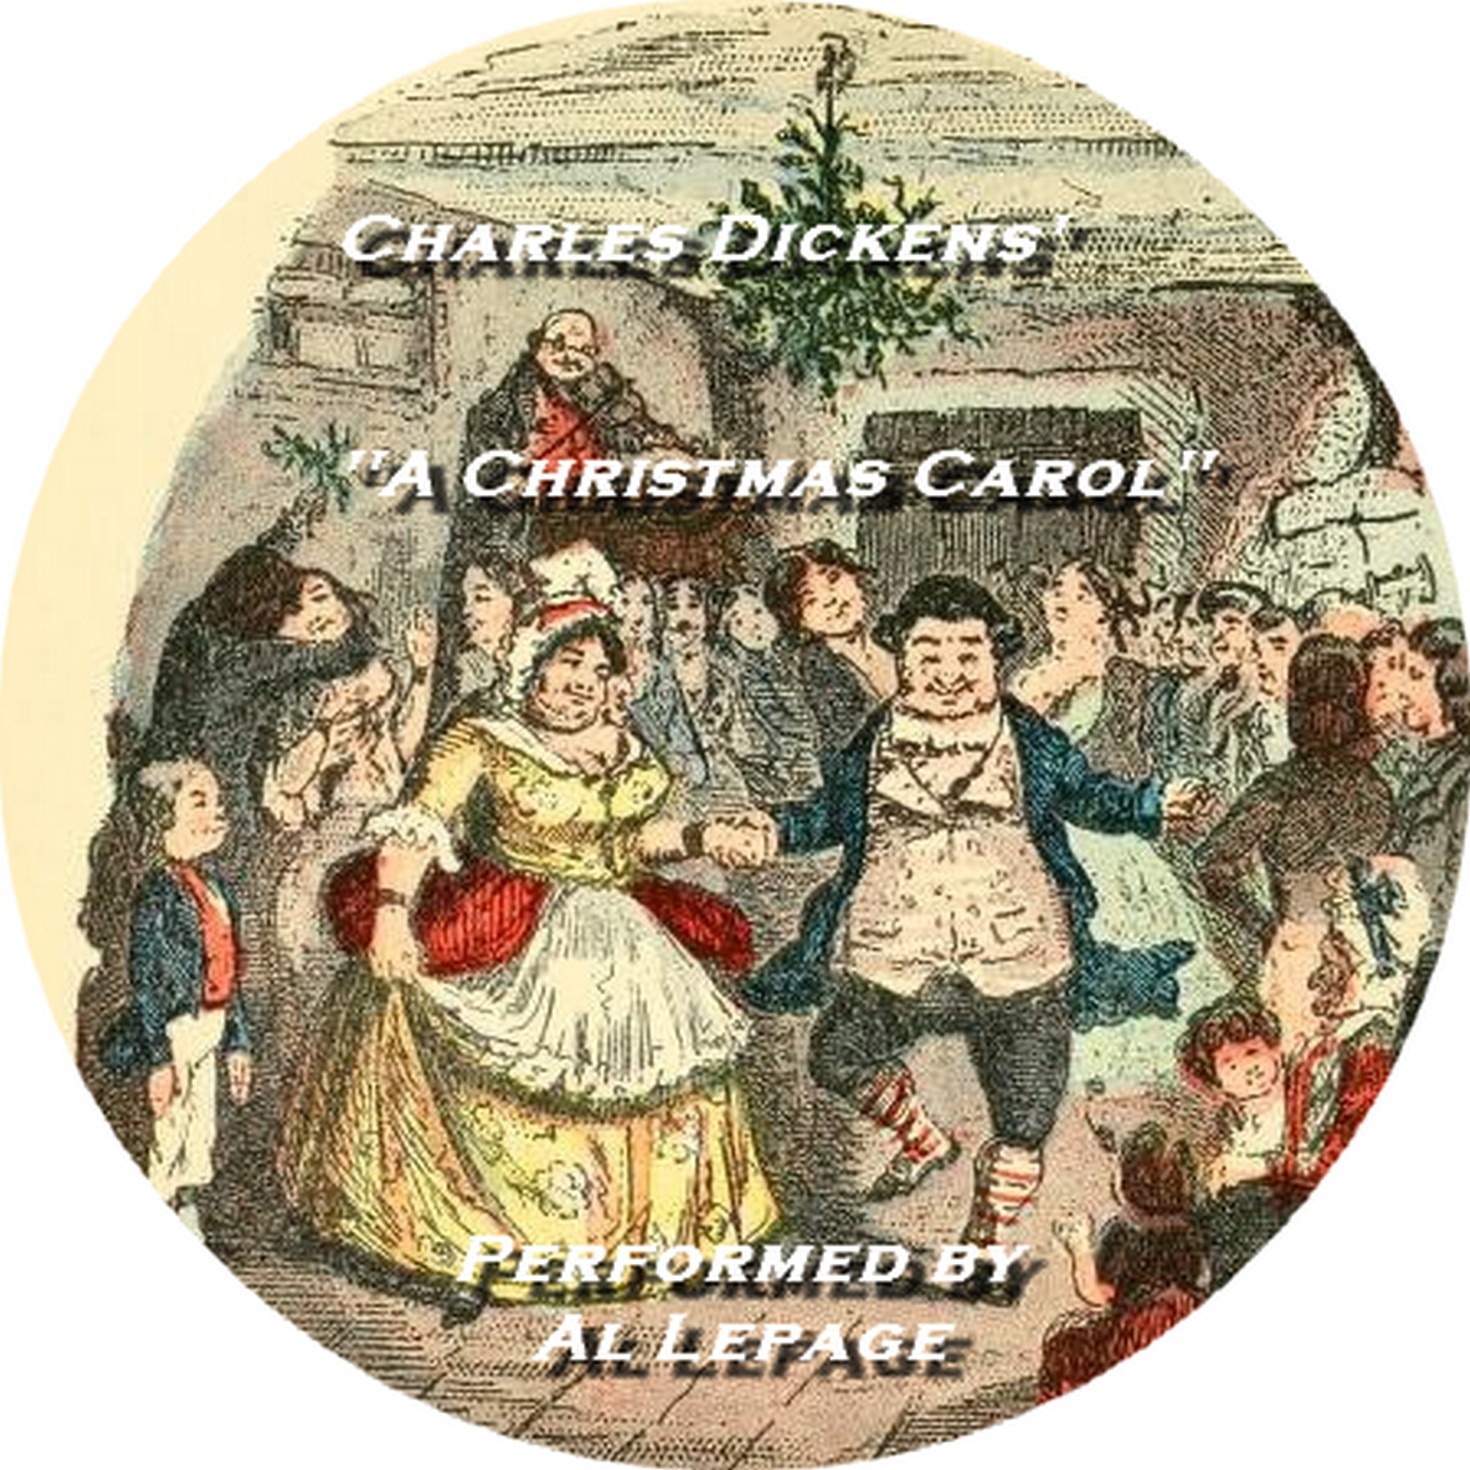 DVD Disc Graphic First Ed. A Christmas Carol, 1843!